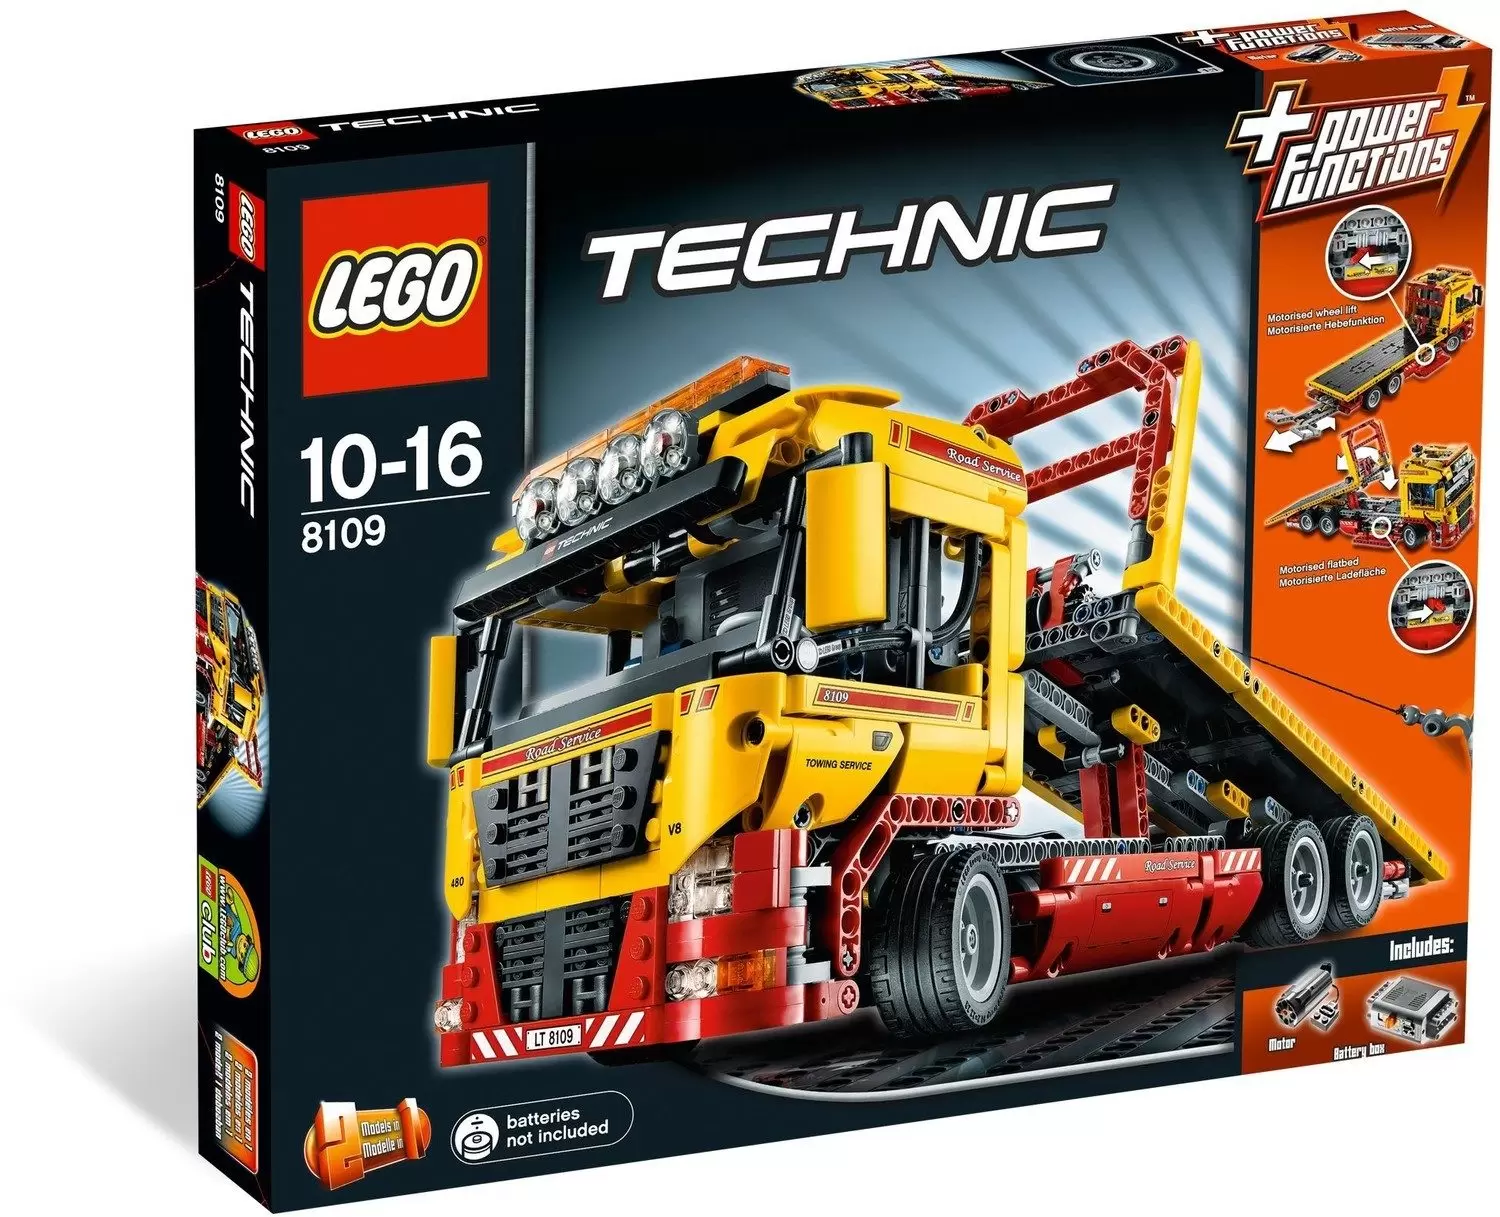 Exceed Beer Sinewi Flatbed Truck - LEGO Technic set 8109